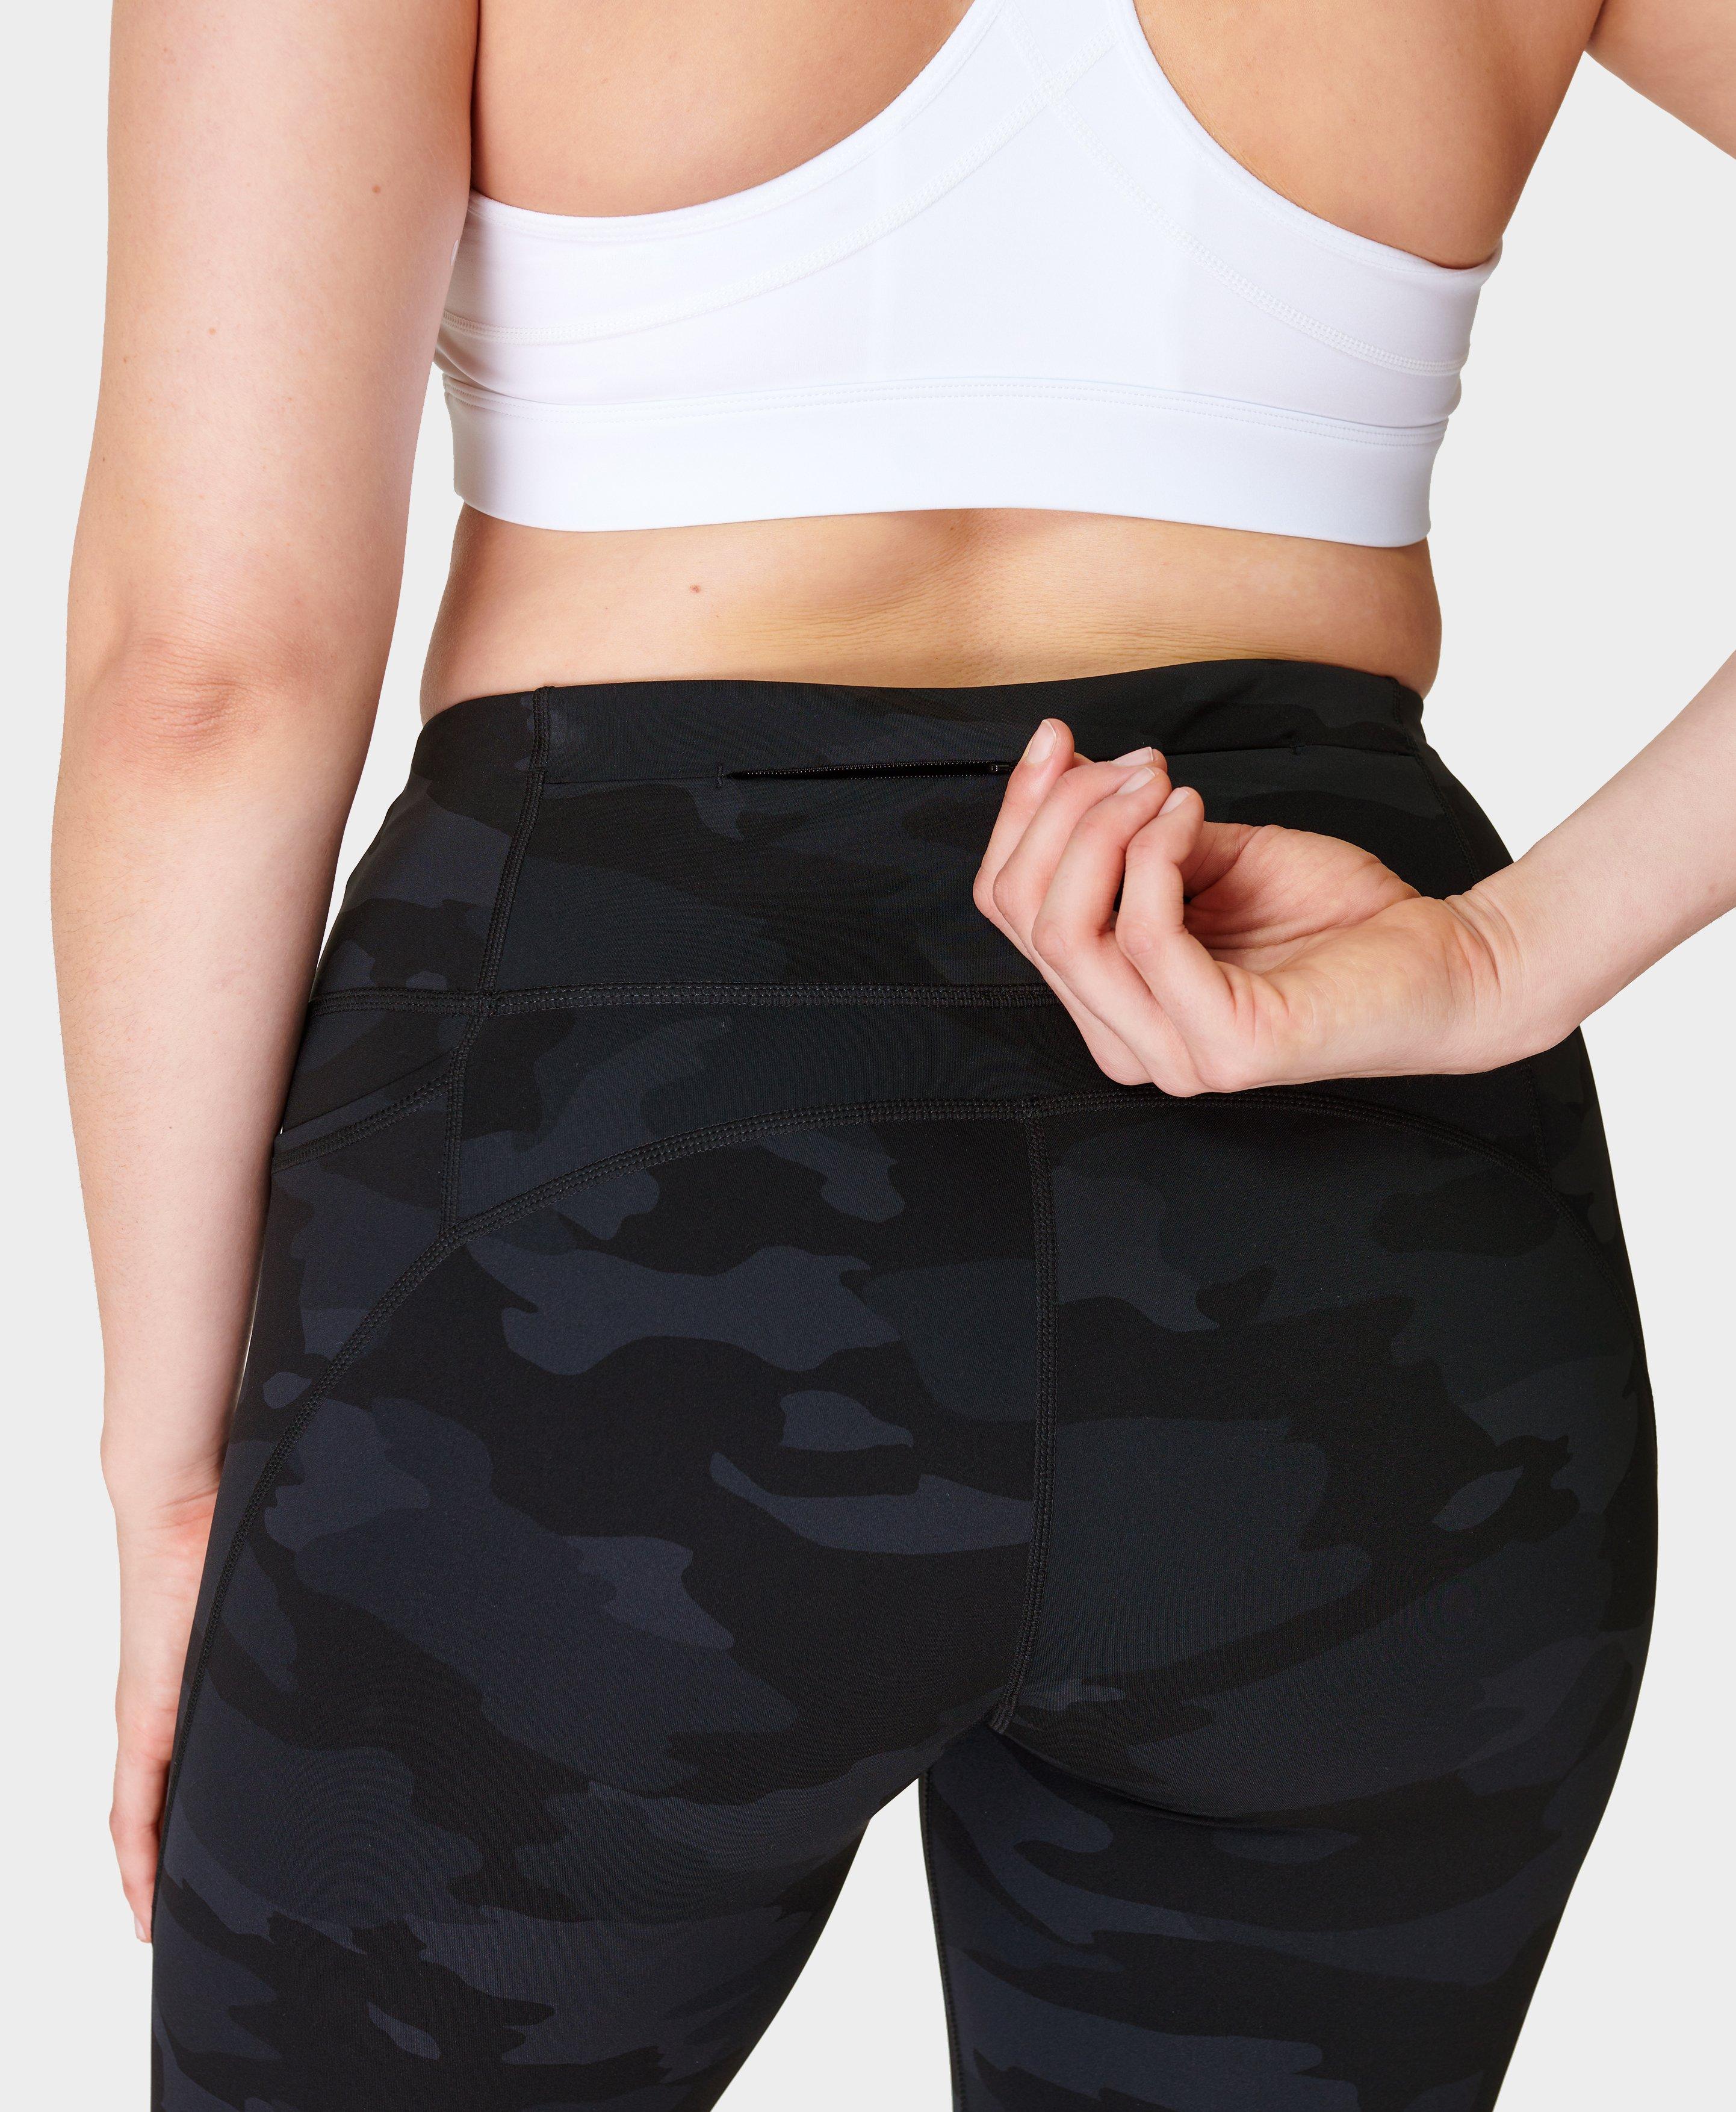 Stay Stylish and Active in Black Camo Printed Leggings with Active Wear  Compression by Twisted420Glass - Perfect for Workouts and Everyday